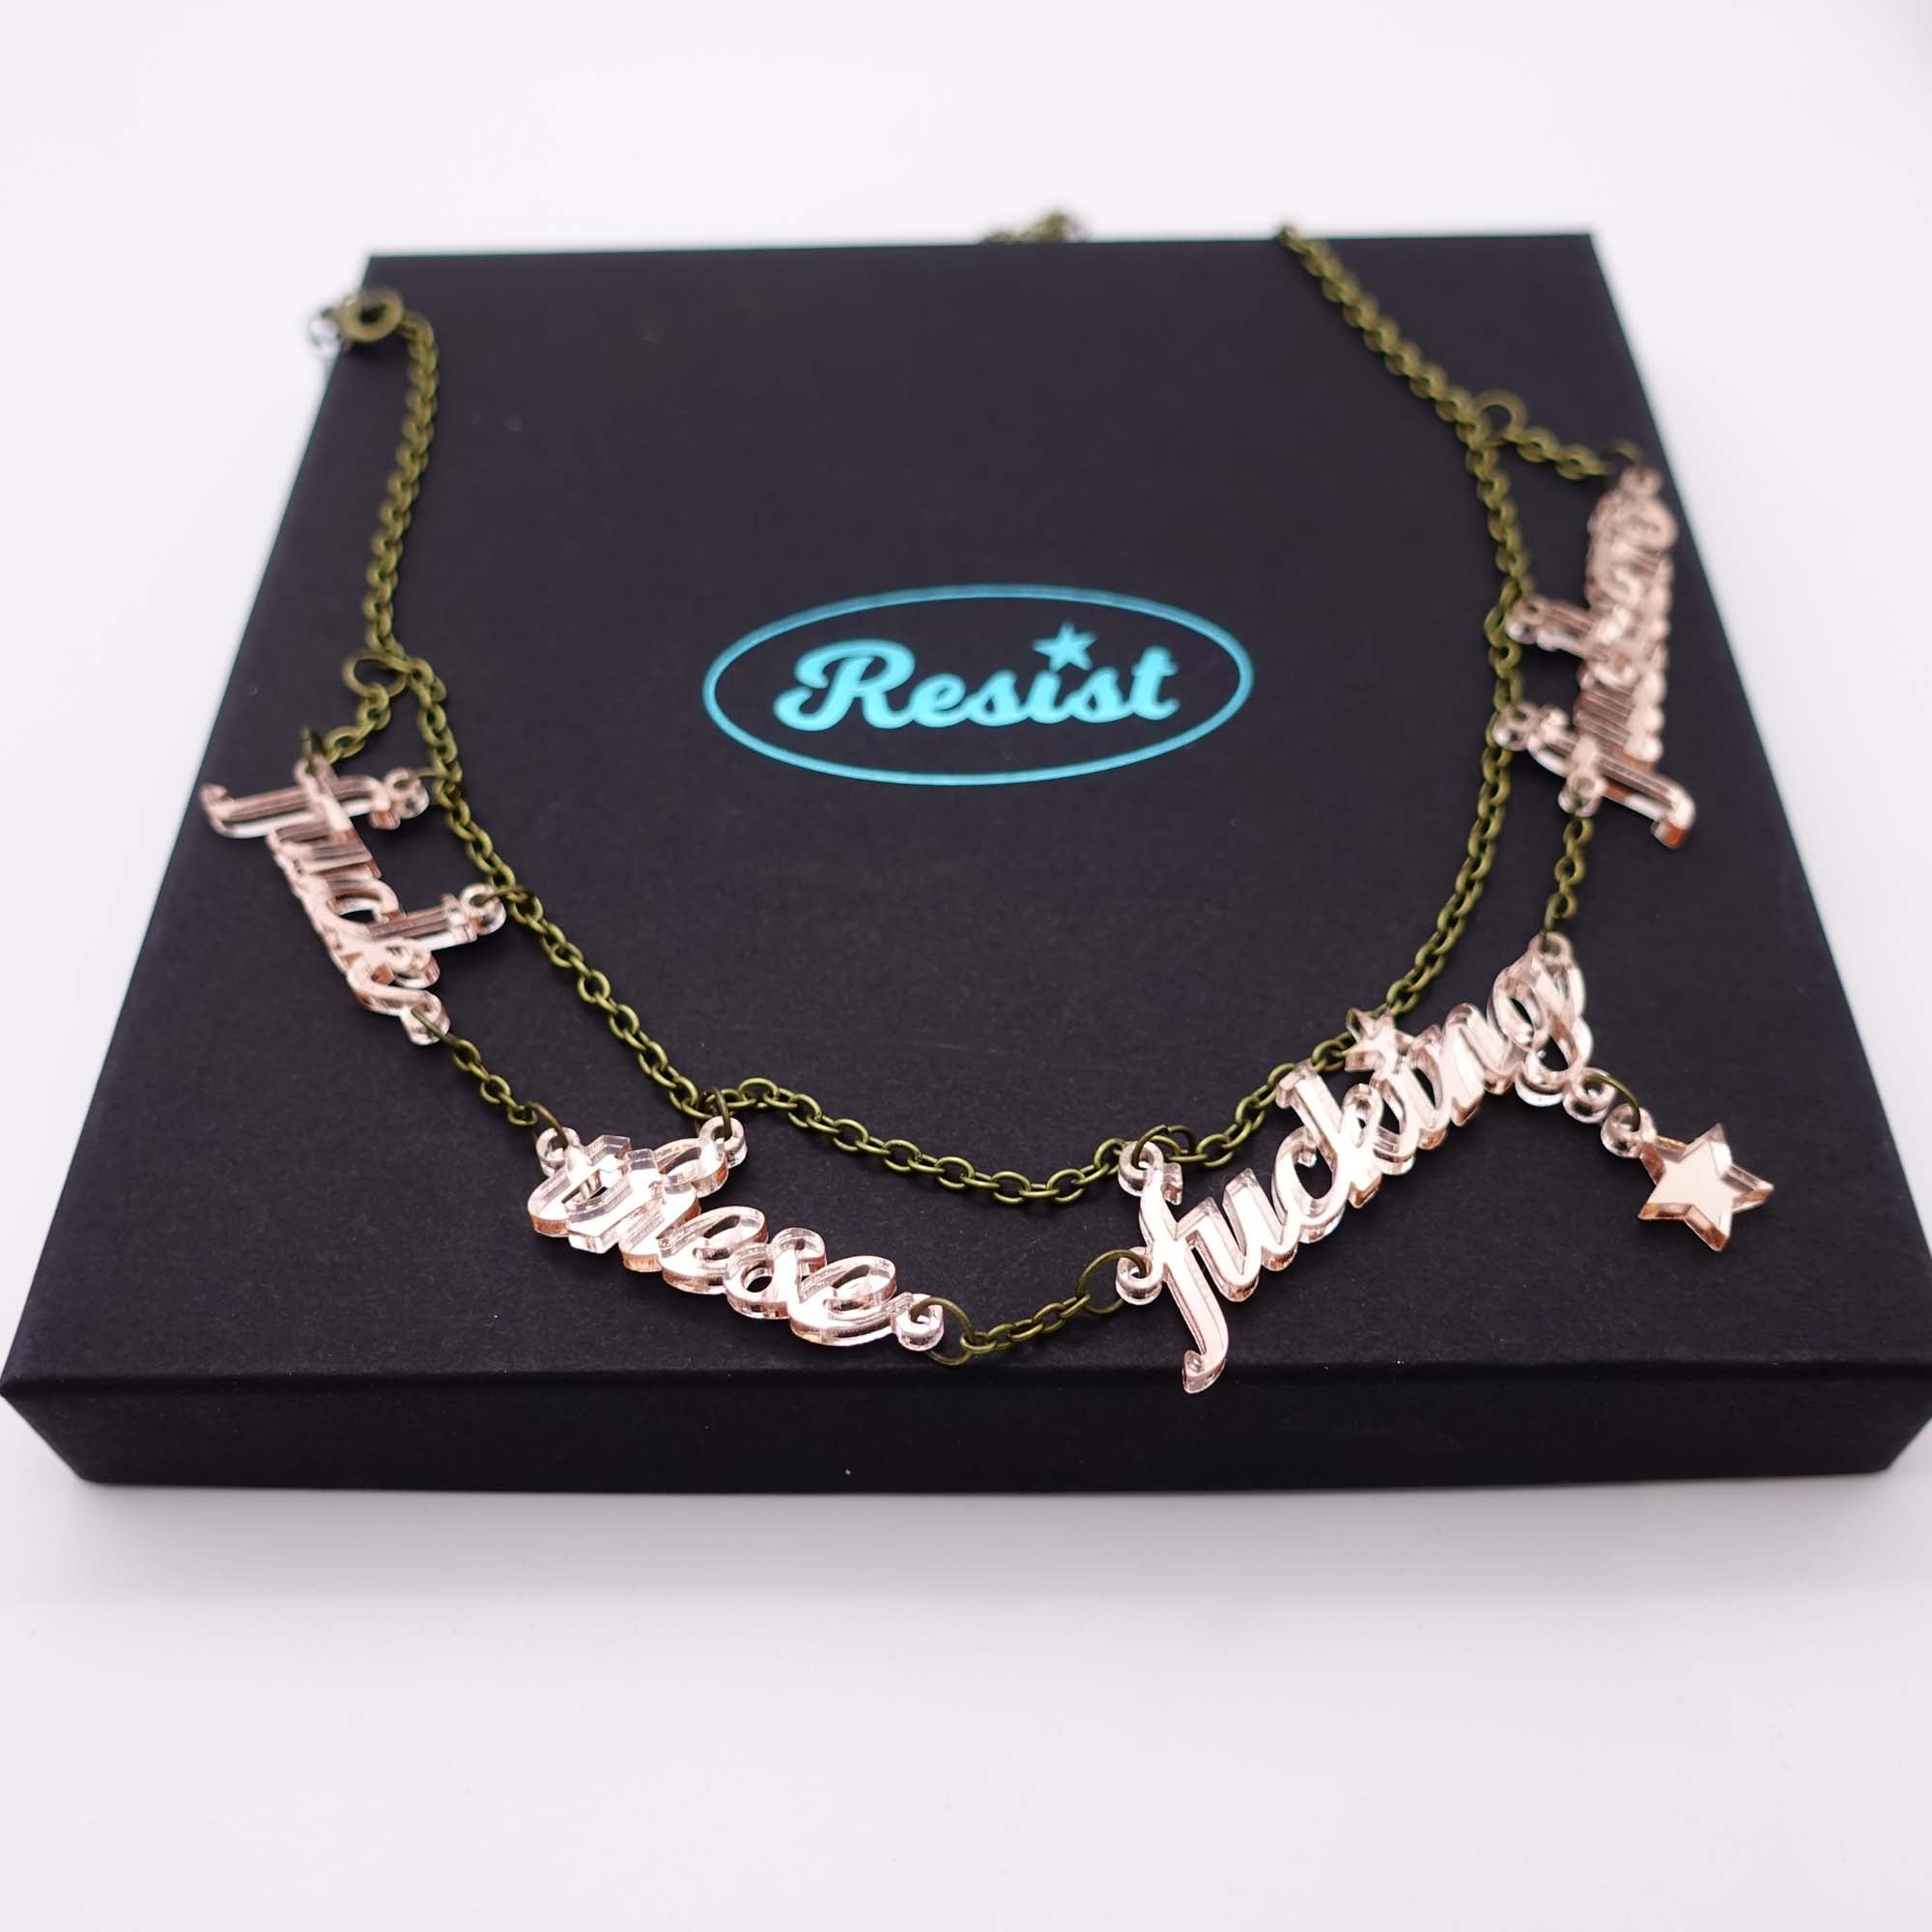 Rose gold mirror fuck these fucking fuckers necklace shown in large gift box